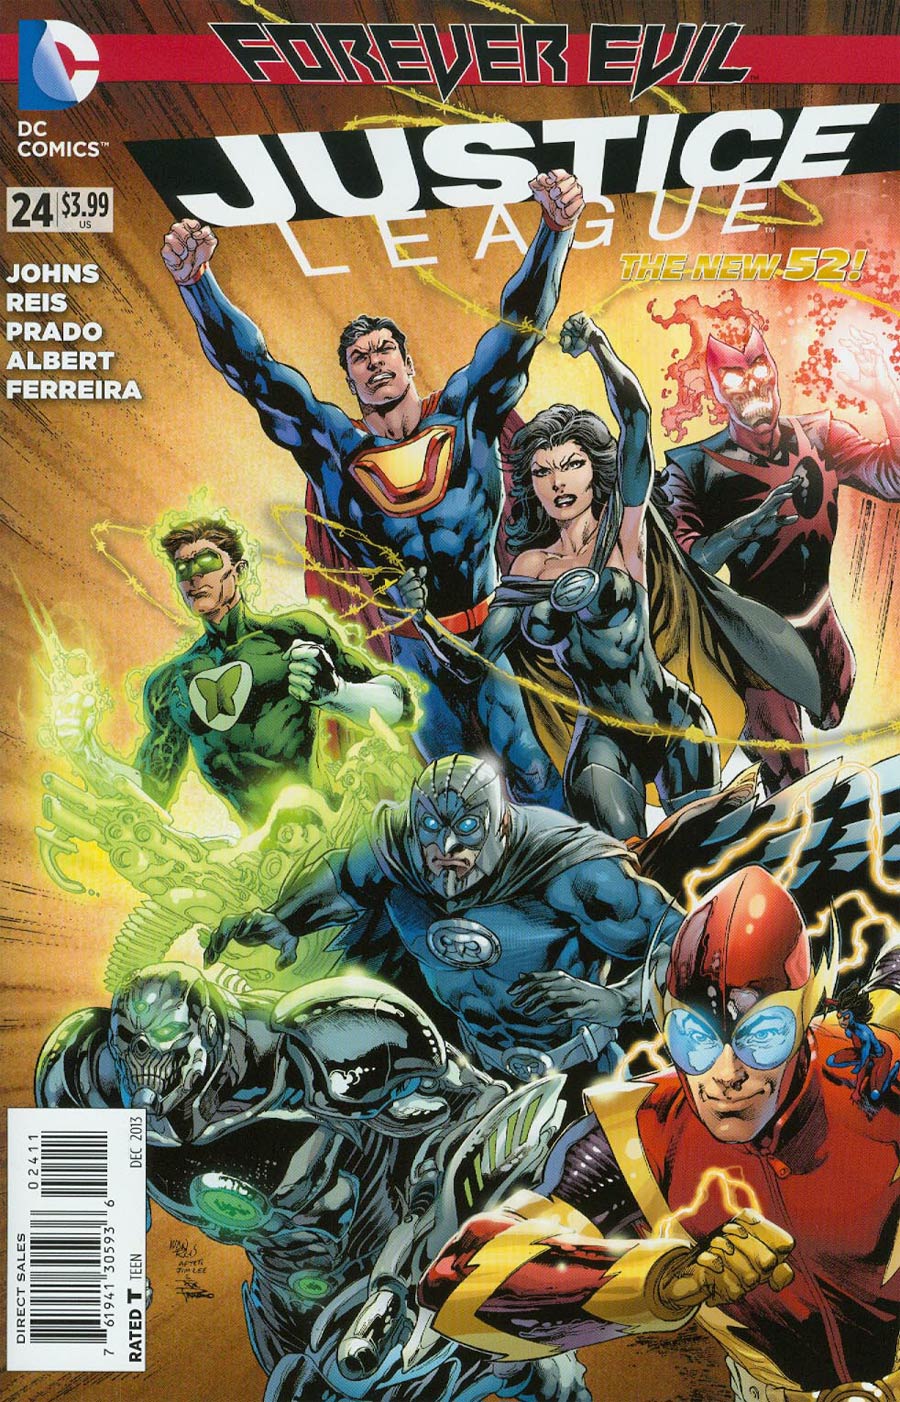 Justice League Vol 2 #24 Cover A Regular Ivan Reis Cover (Forever Evil Tie-In)